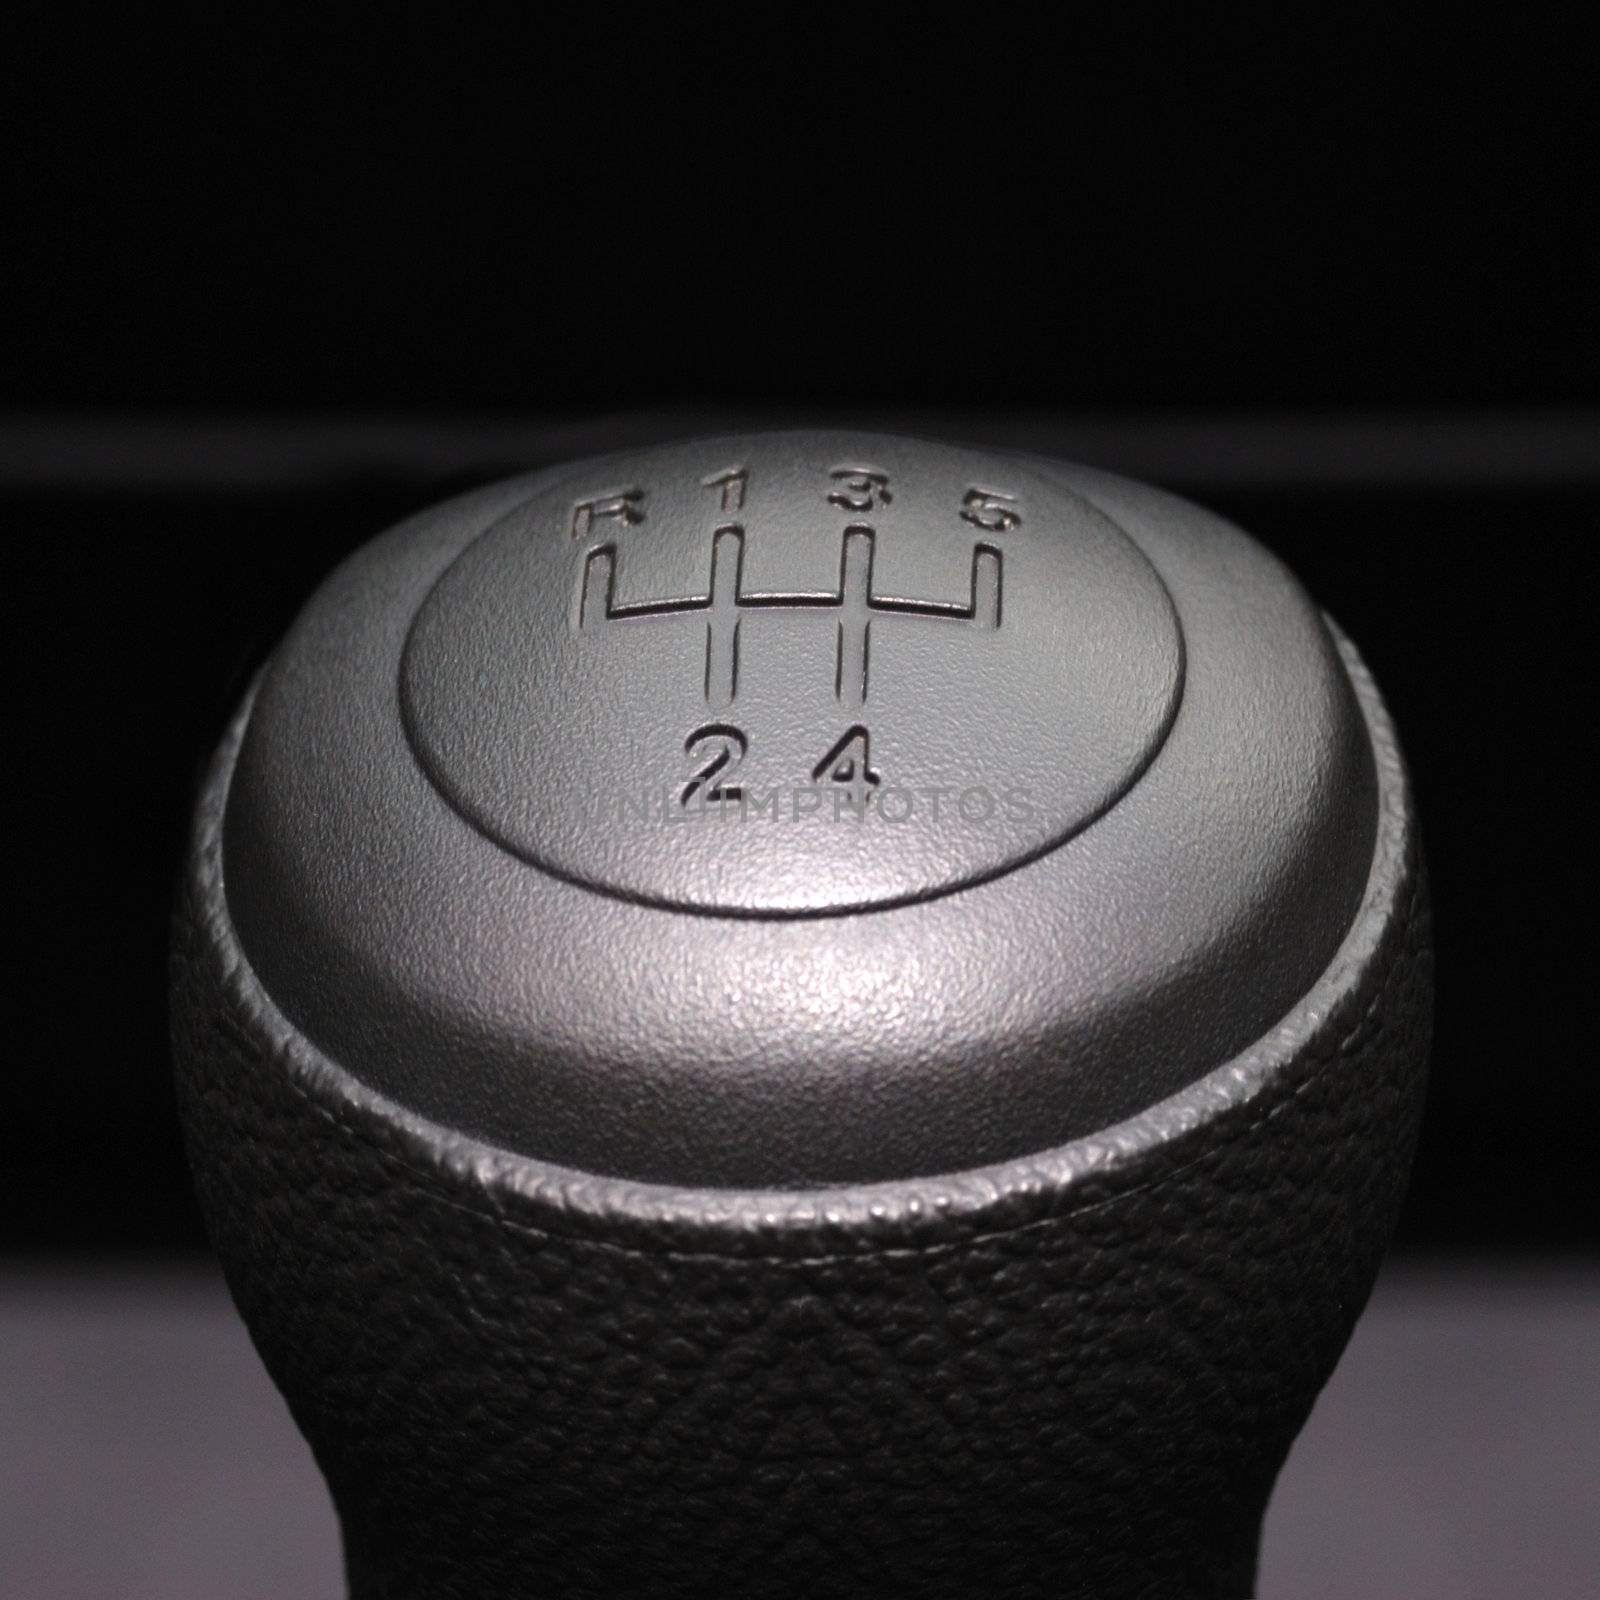 The handle of switching of transfers in the car. The leather handle of a box of transfers